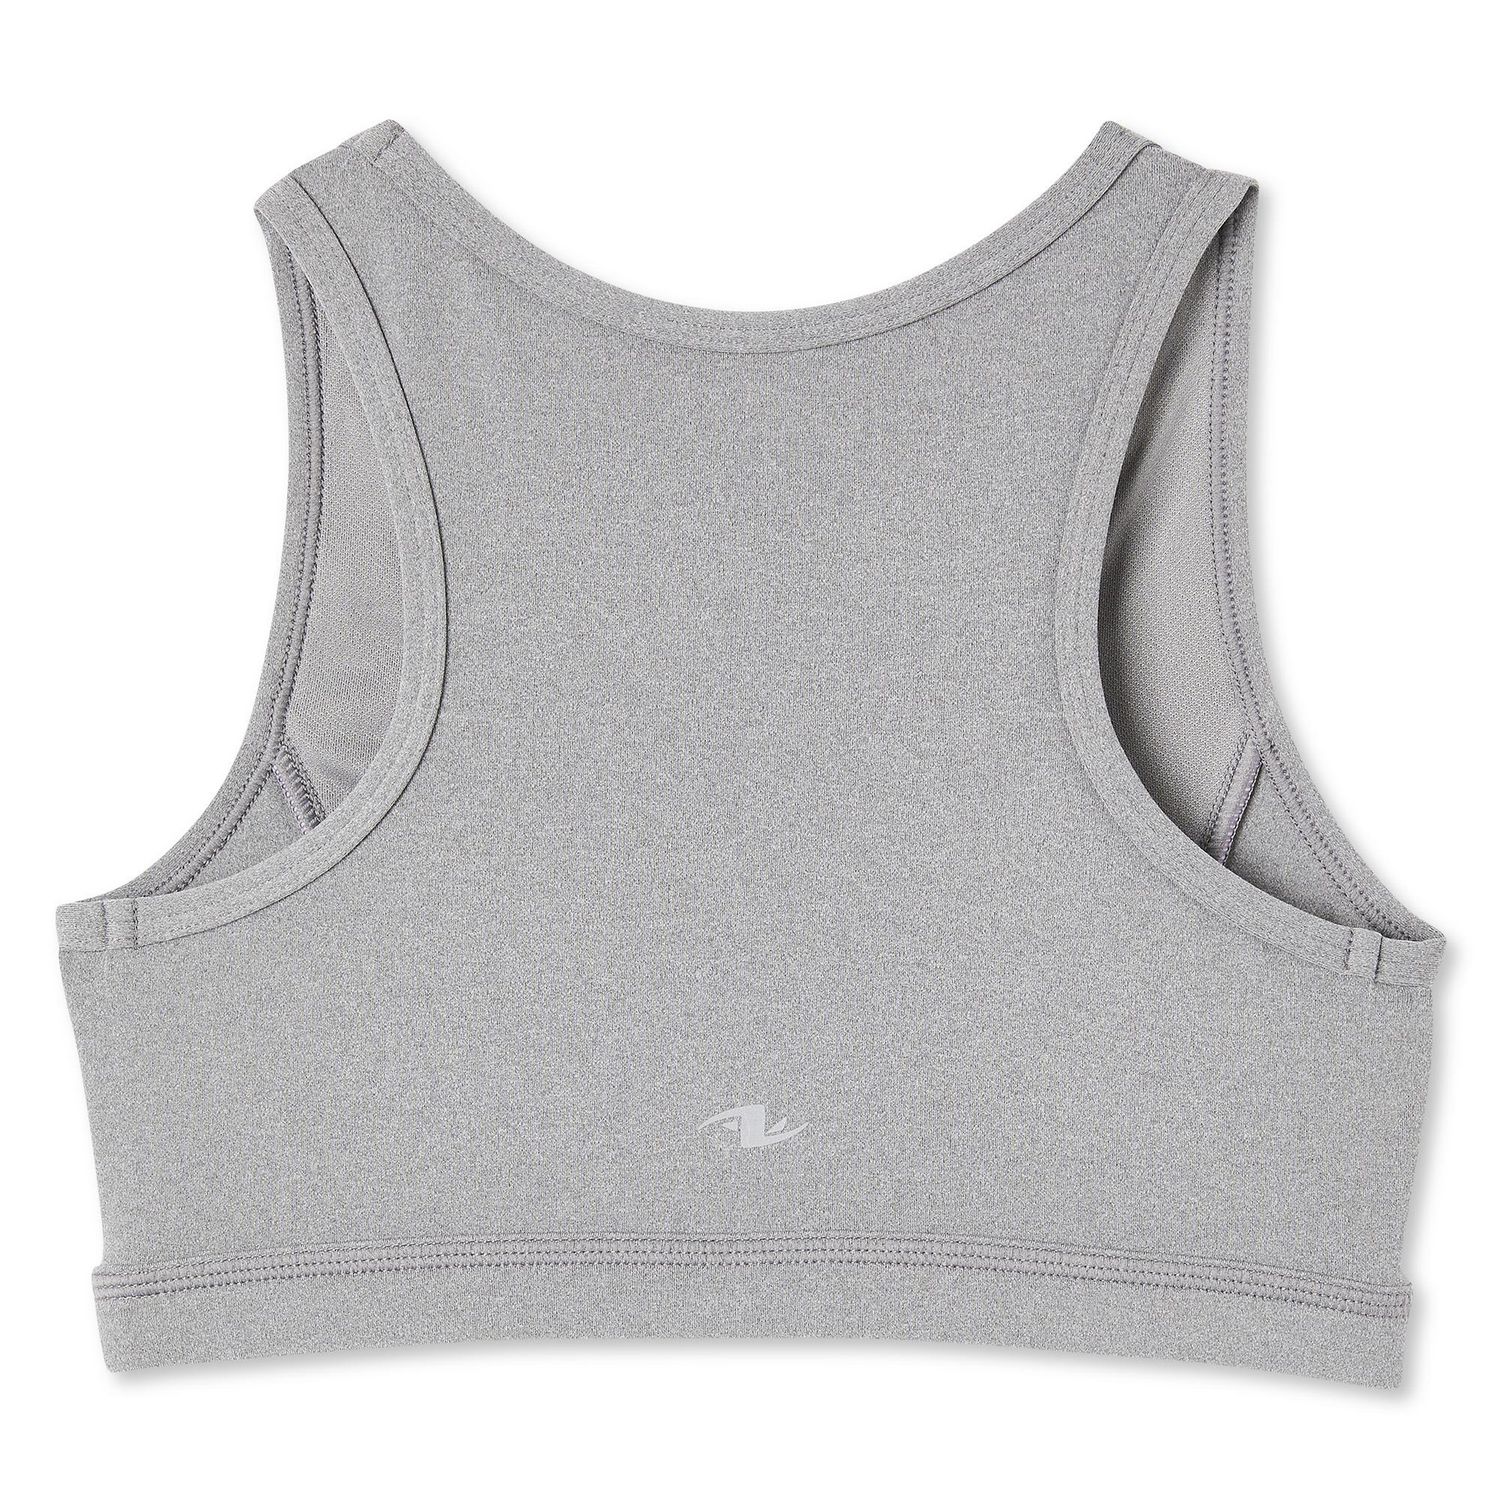 Athletic Works Gray & Black Sports Bra Size XS - $12 (20% Off Retail) -  From Bree